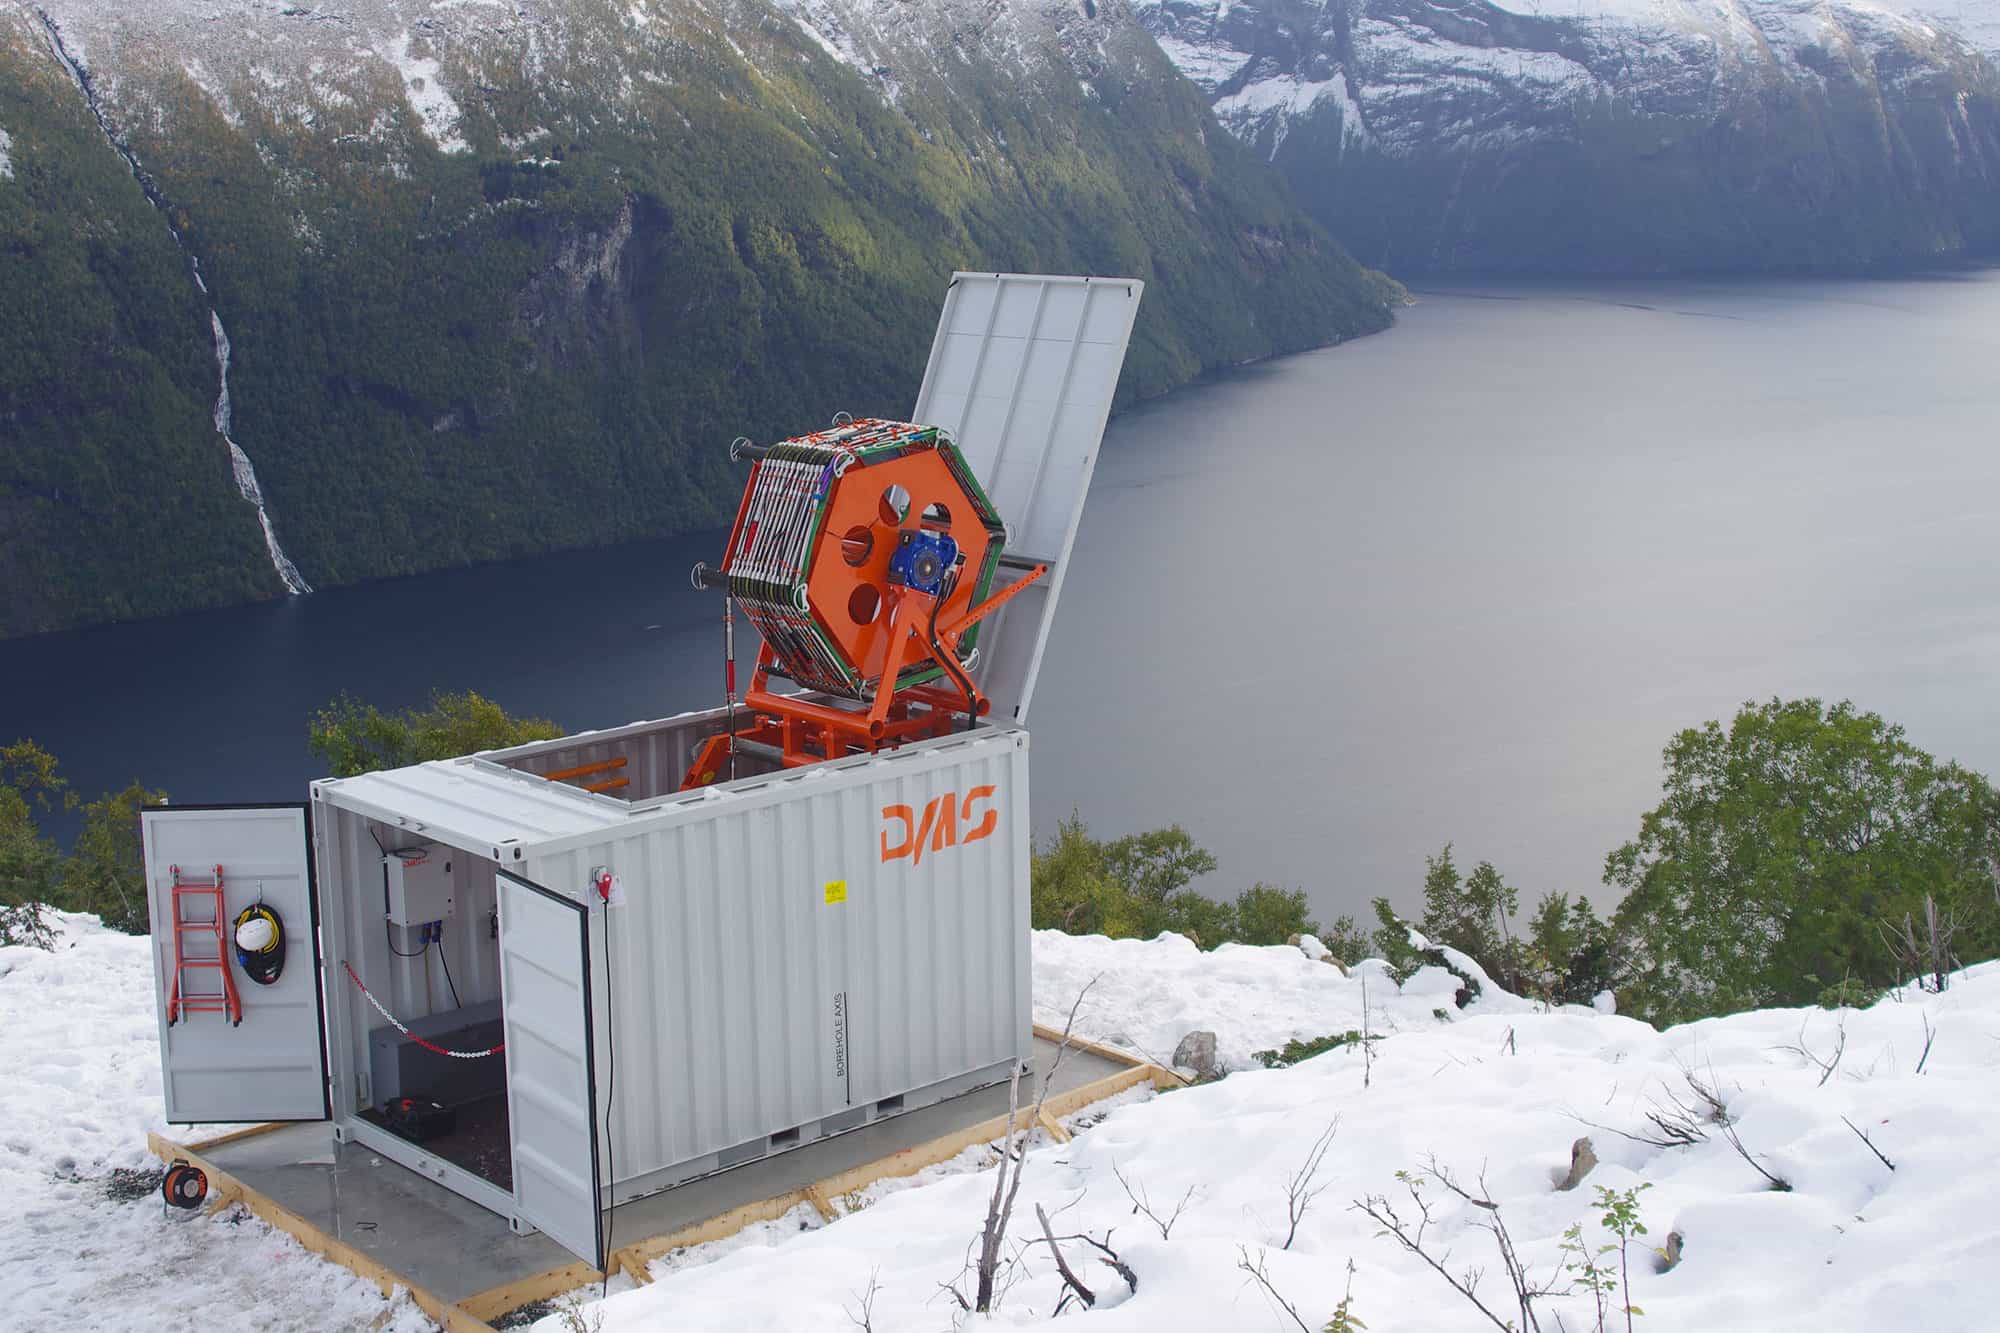 New DMS Containers in Norway